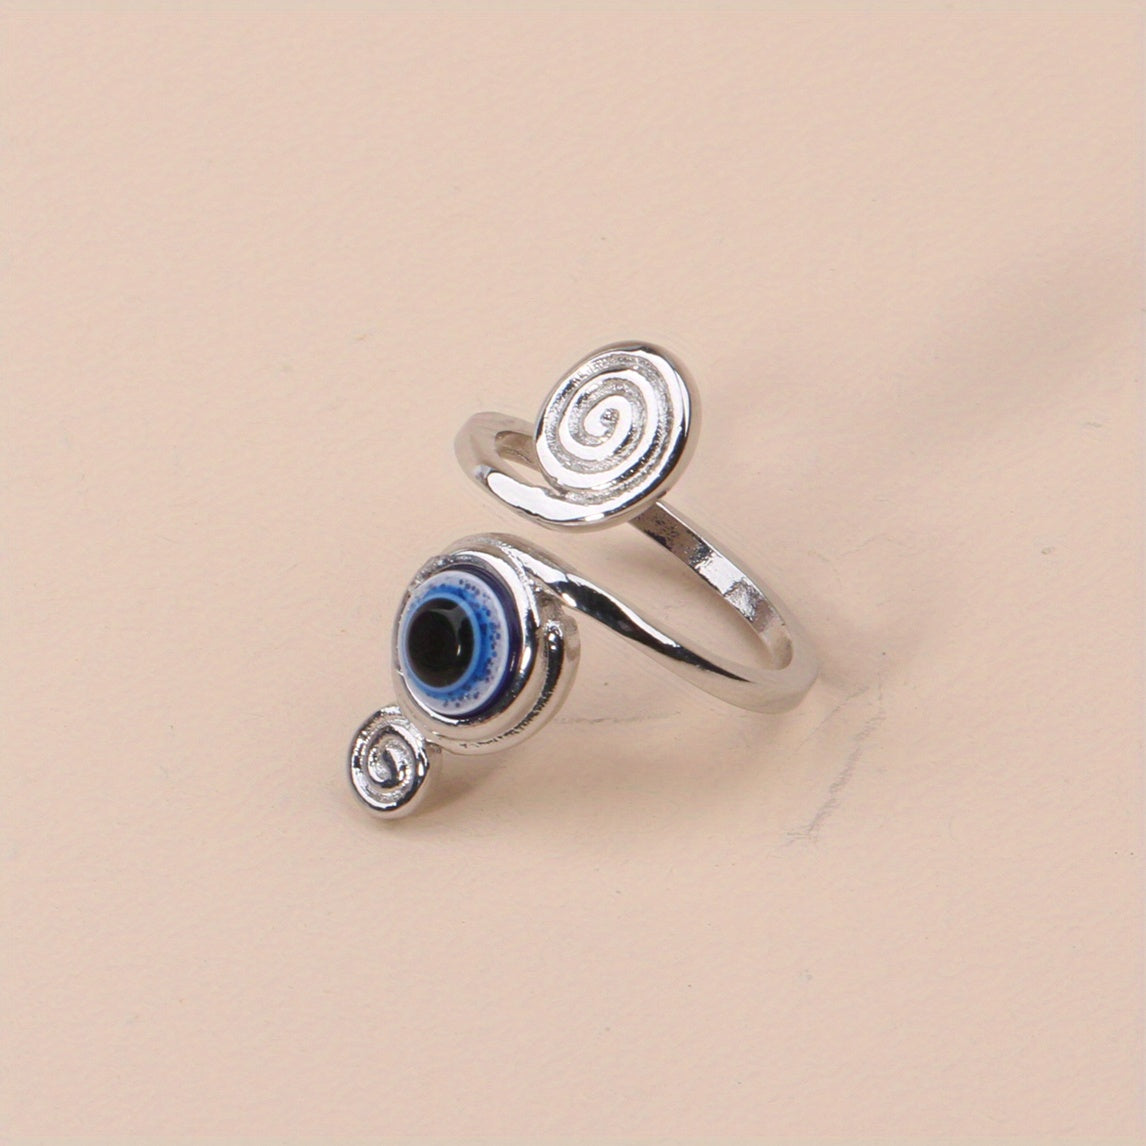 1 Pc Vintage Style Evil Eye Toe Ring Summer Beach Foot Jewelry Gift Adjustable